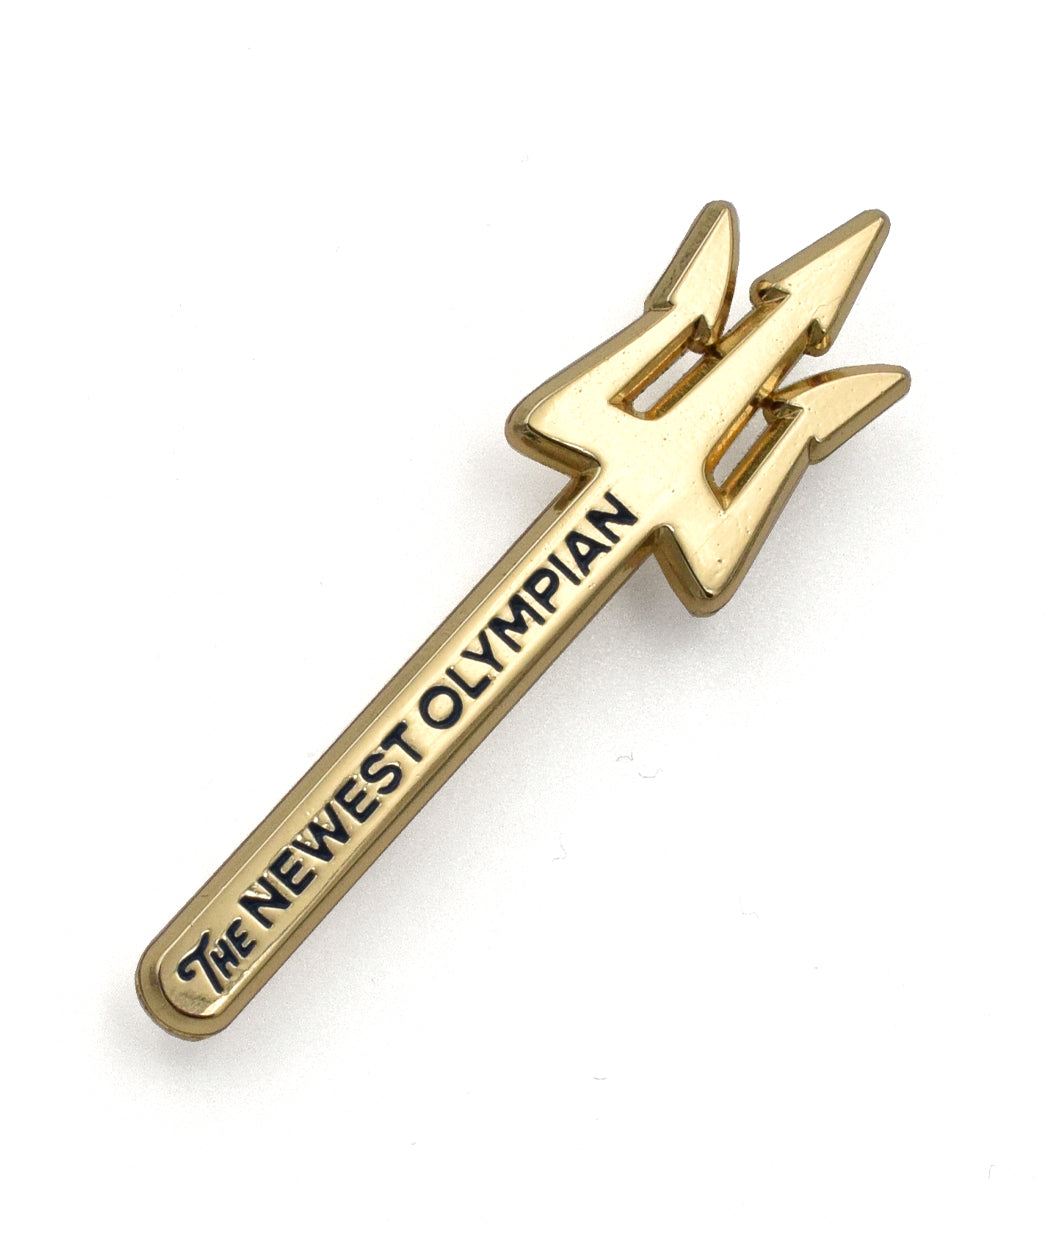 A golden pin shaped like a trident with the words 